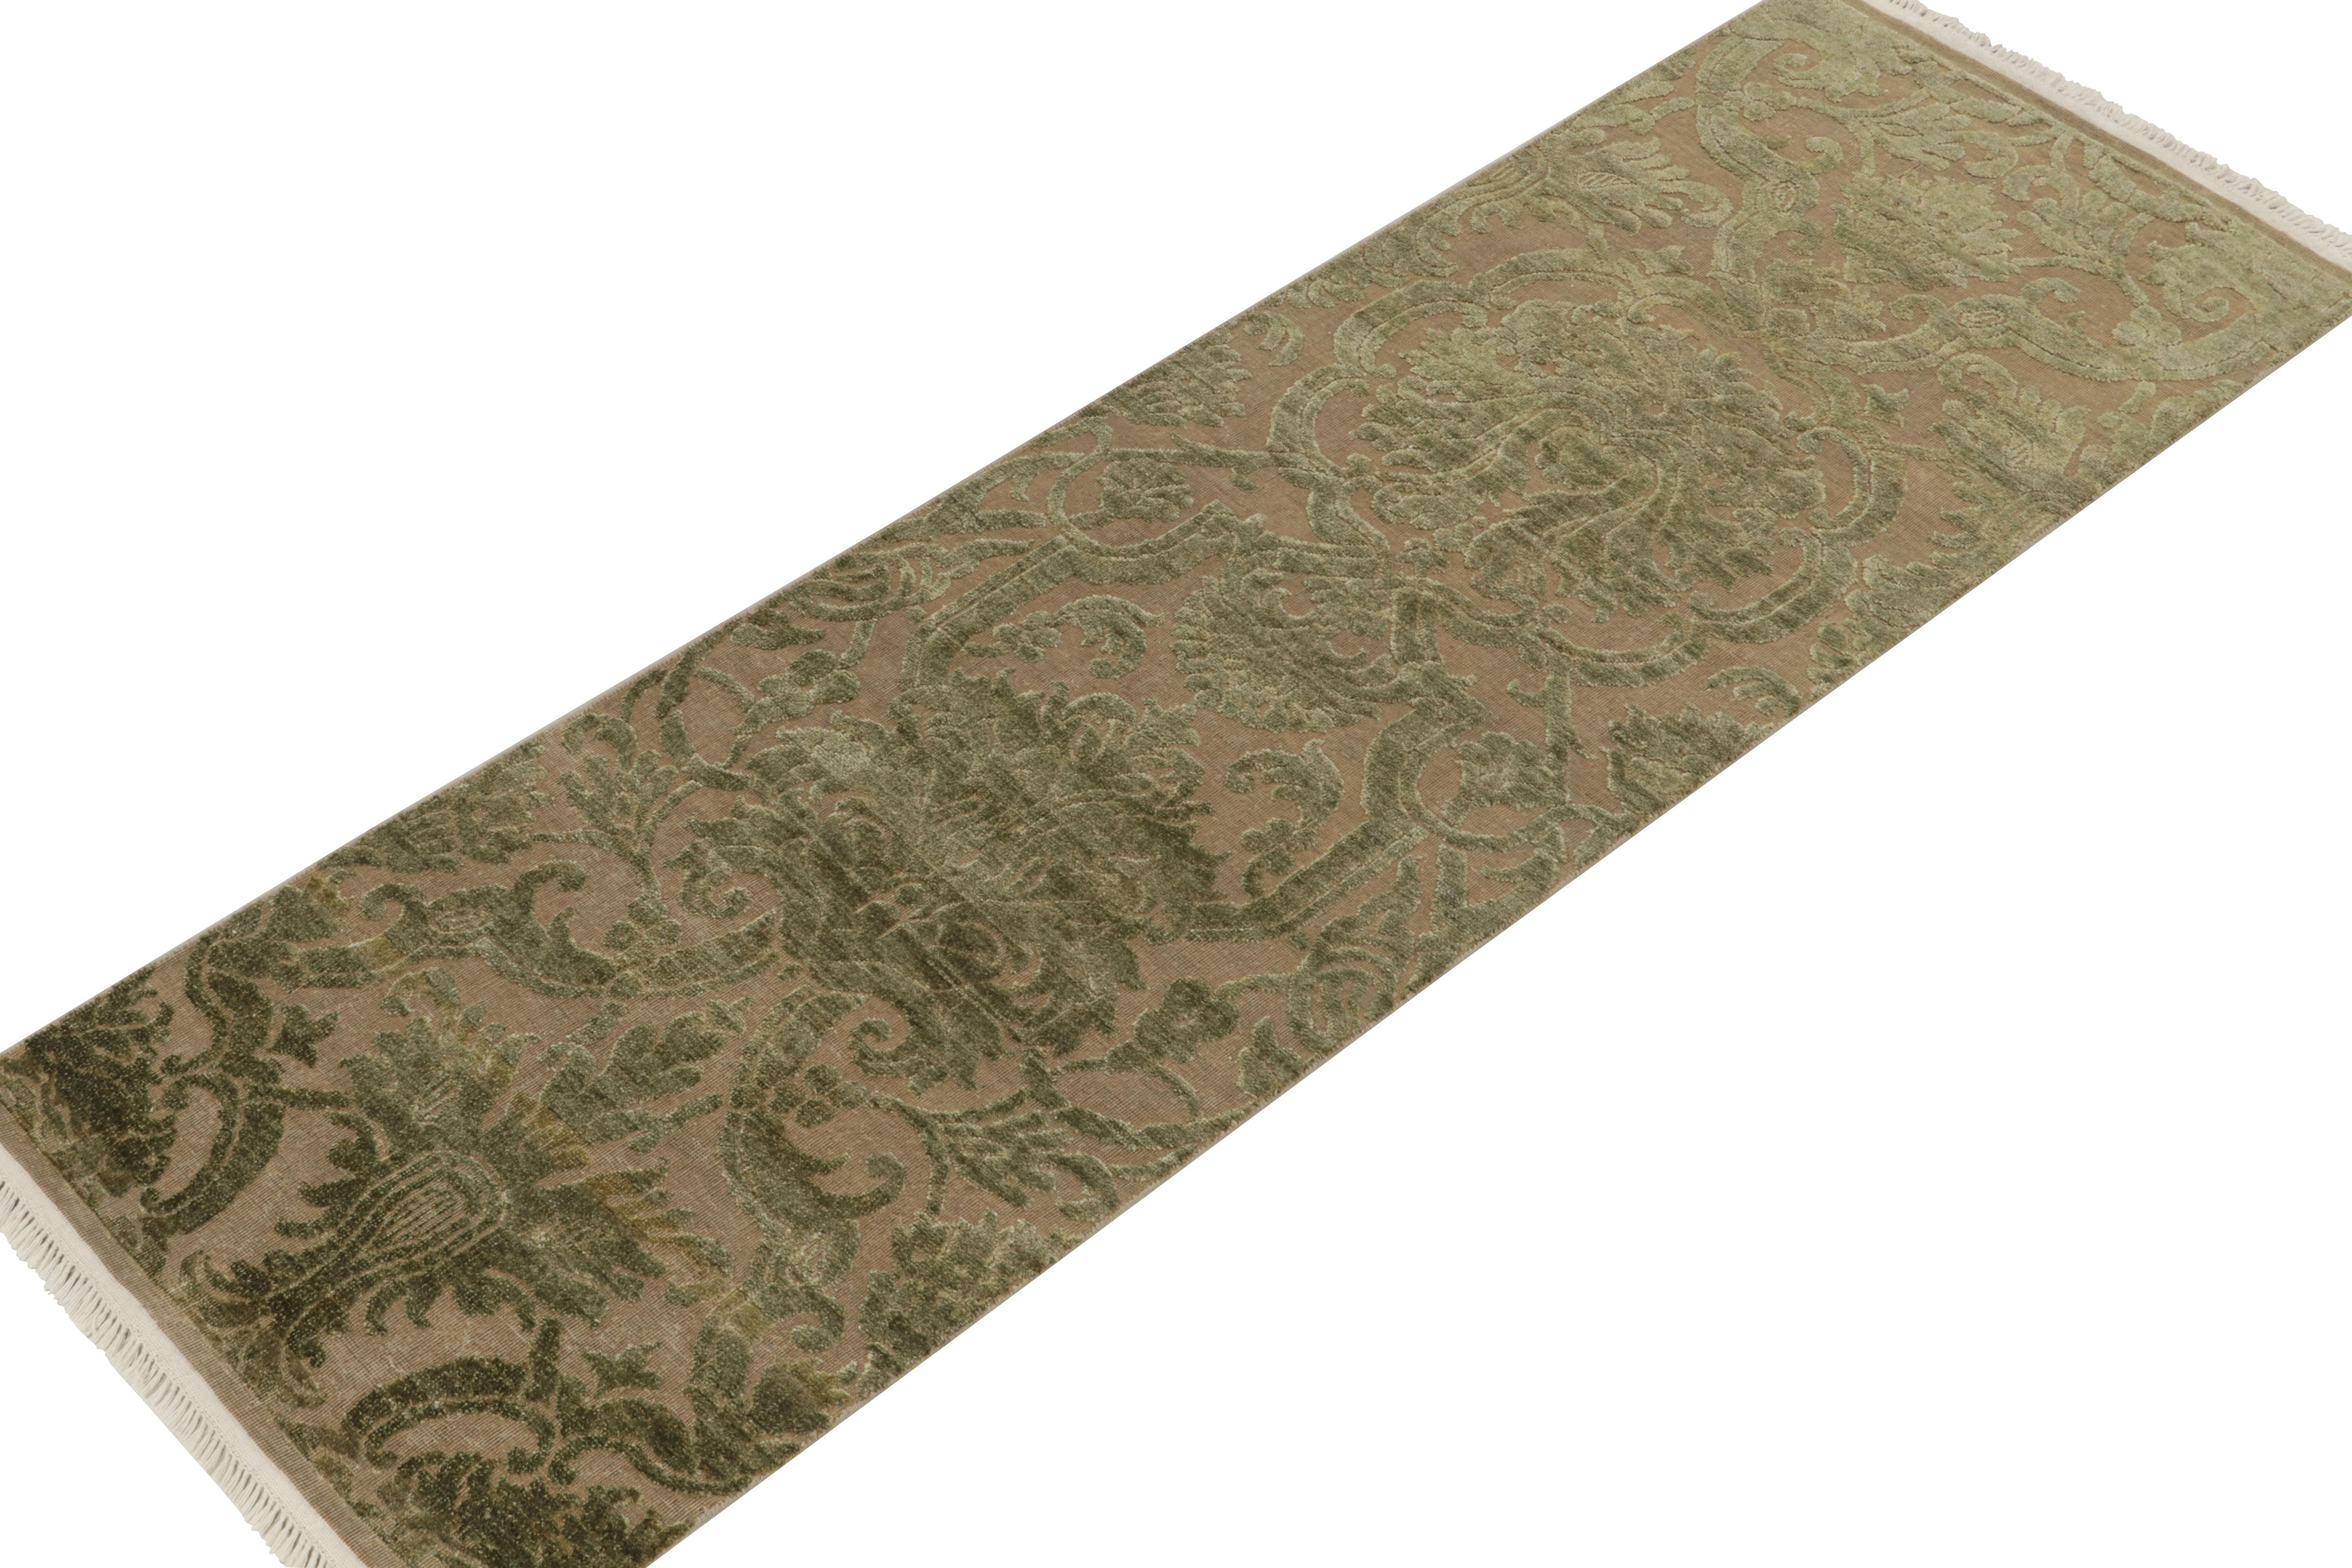 Indian Rug & Kilim’s European Style Runner in Beige with Green Floral Patterns For Sale